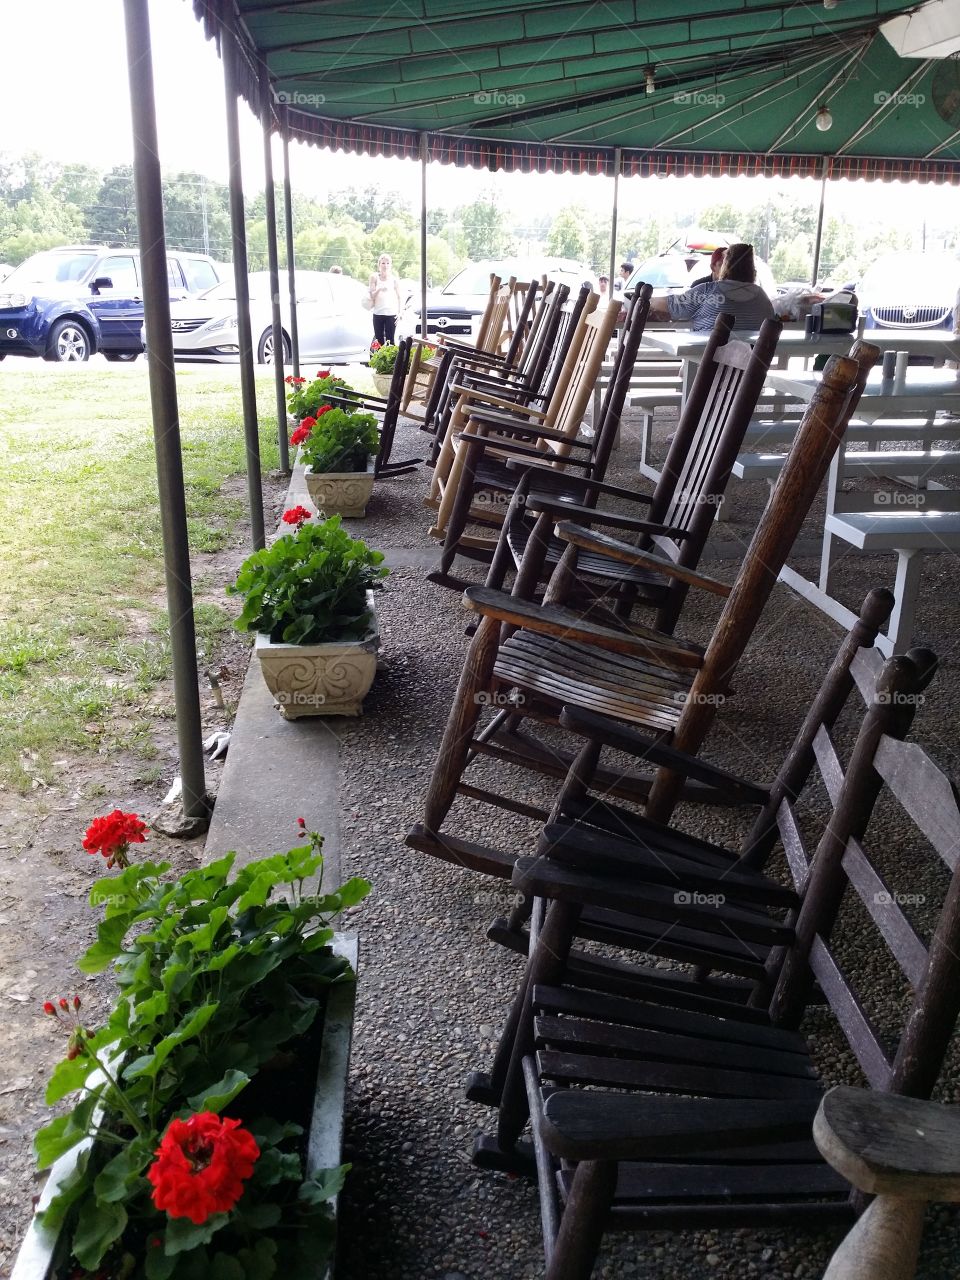 Rocking chairs on the porch of this very popular produce stand/barbecue restaurant/ice cream parlor invite family and friends to sit and visit for a spell,